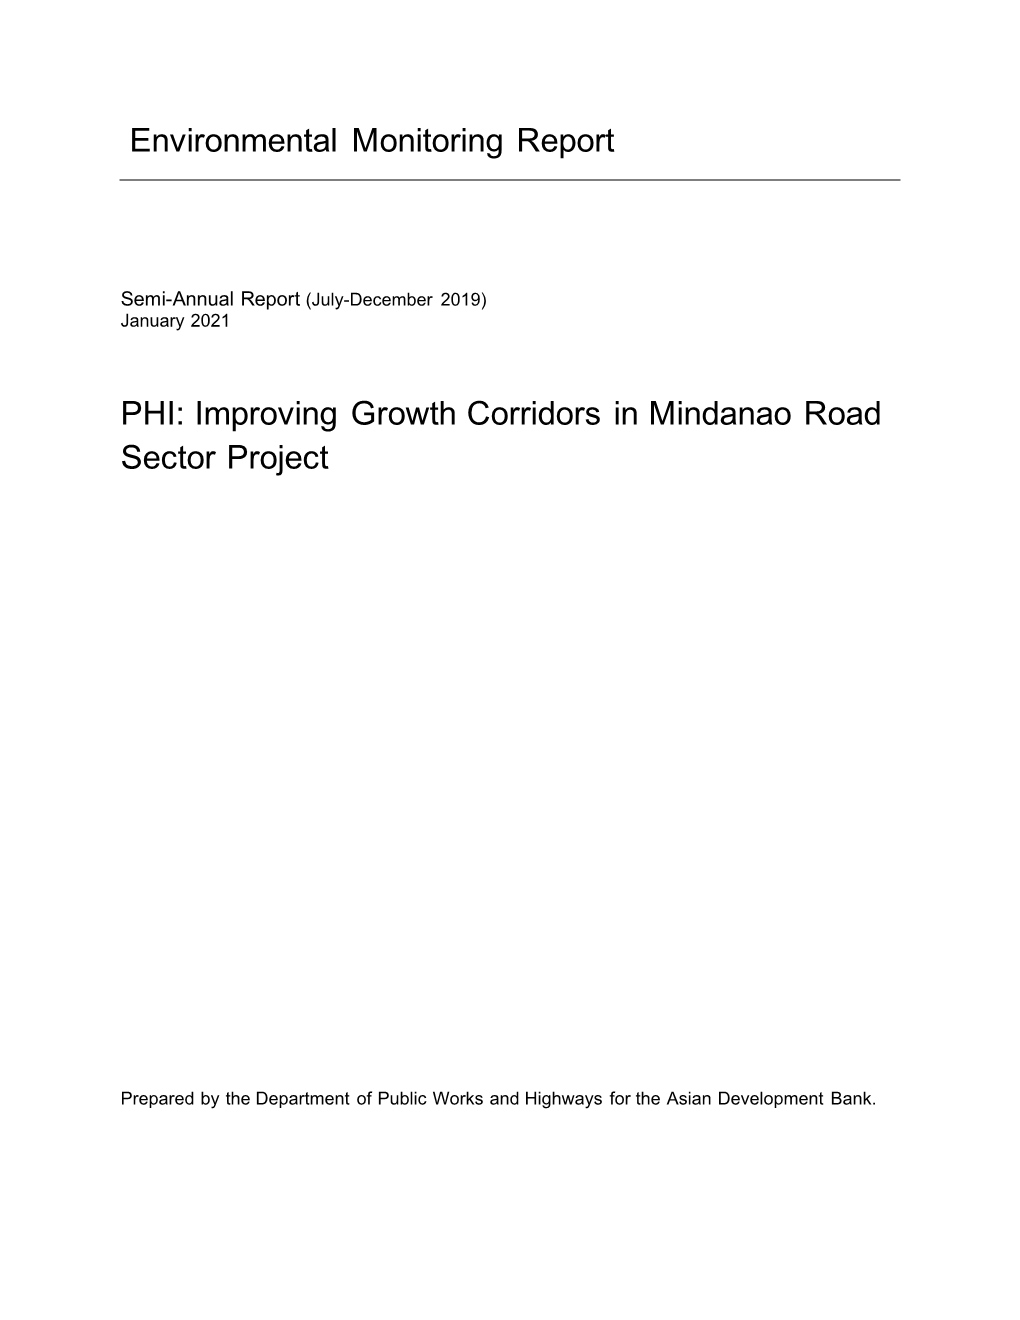 Improving Growth Corridors in Mindanao Road Sector Project